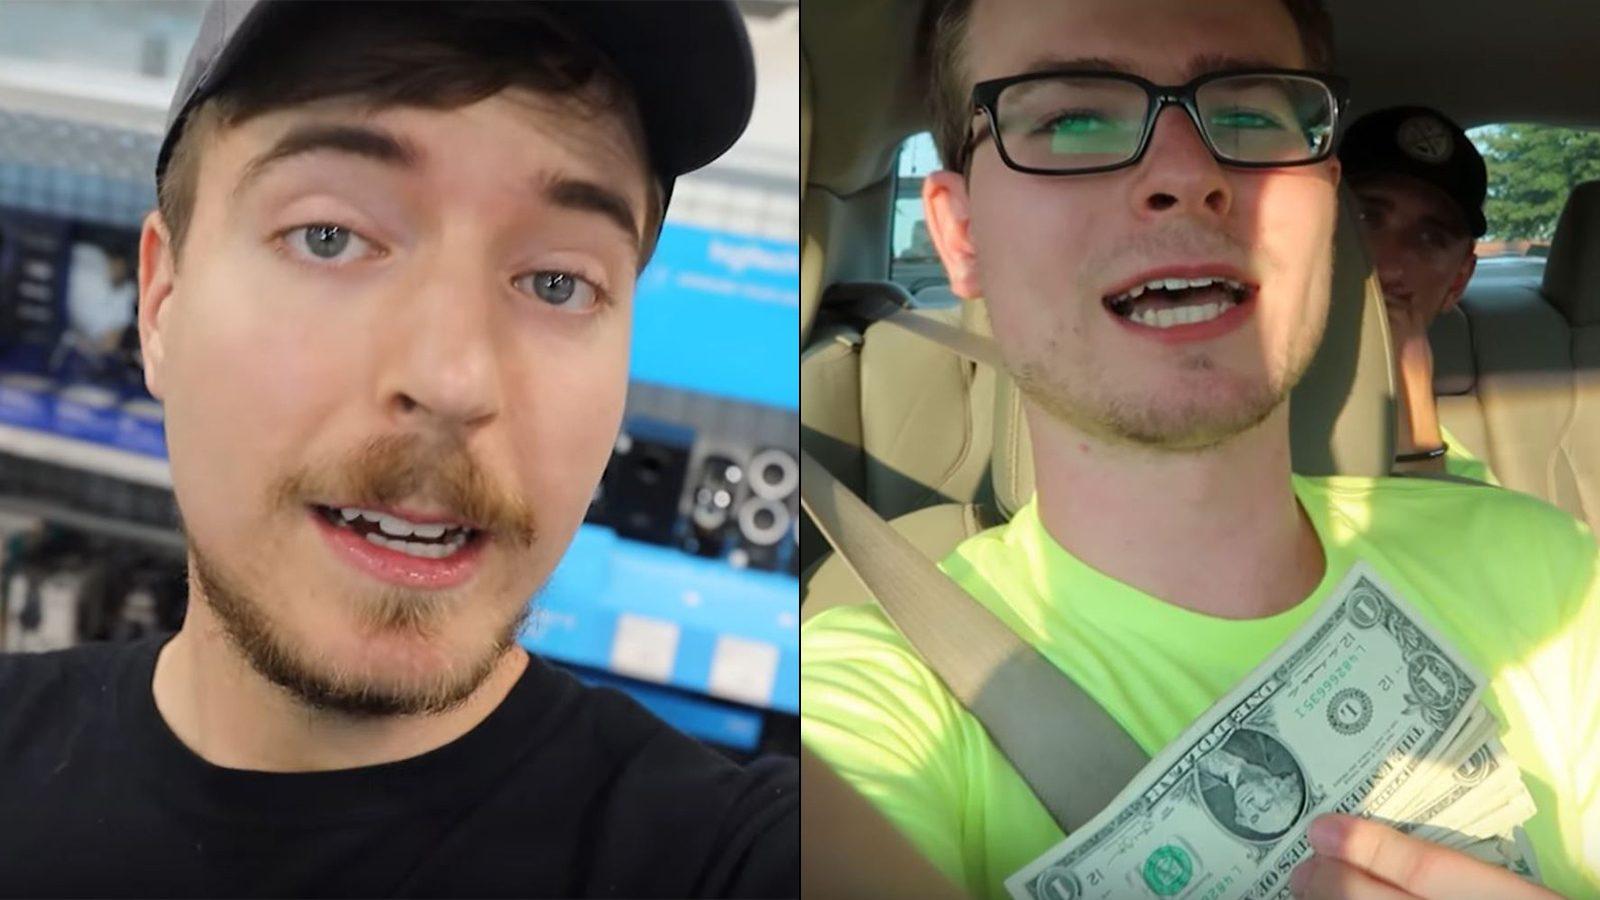 MrBeast's Latest Video Stunt Spawns Nationwide, Delivery-Only Burger Chain  - Tubefilter